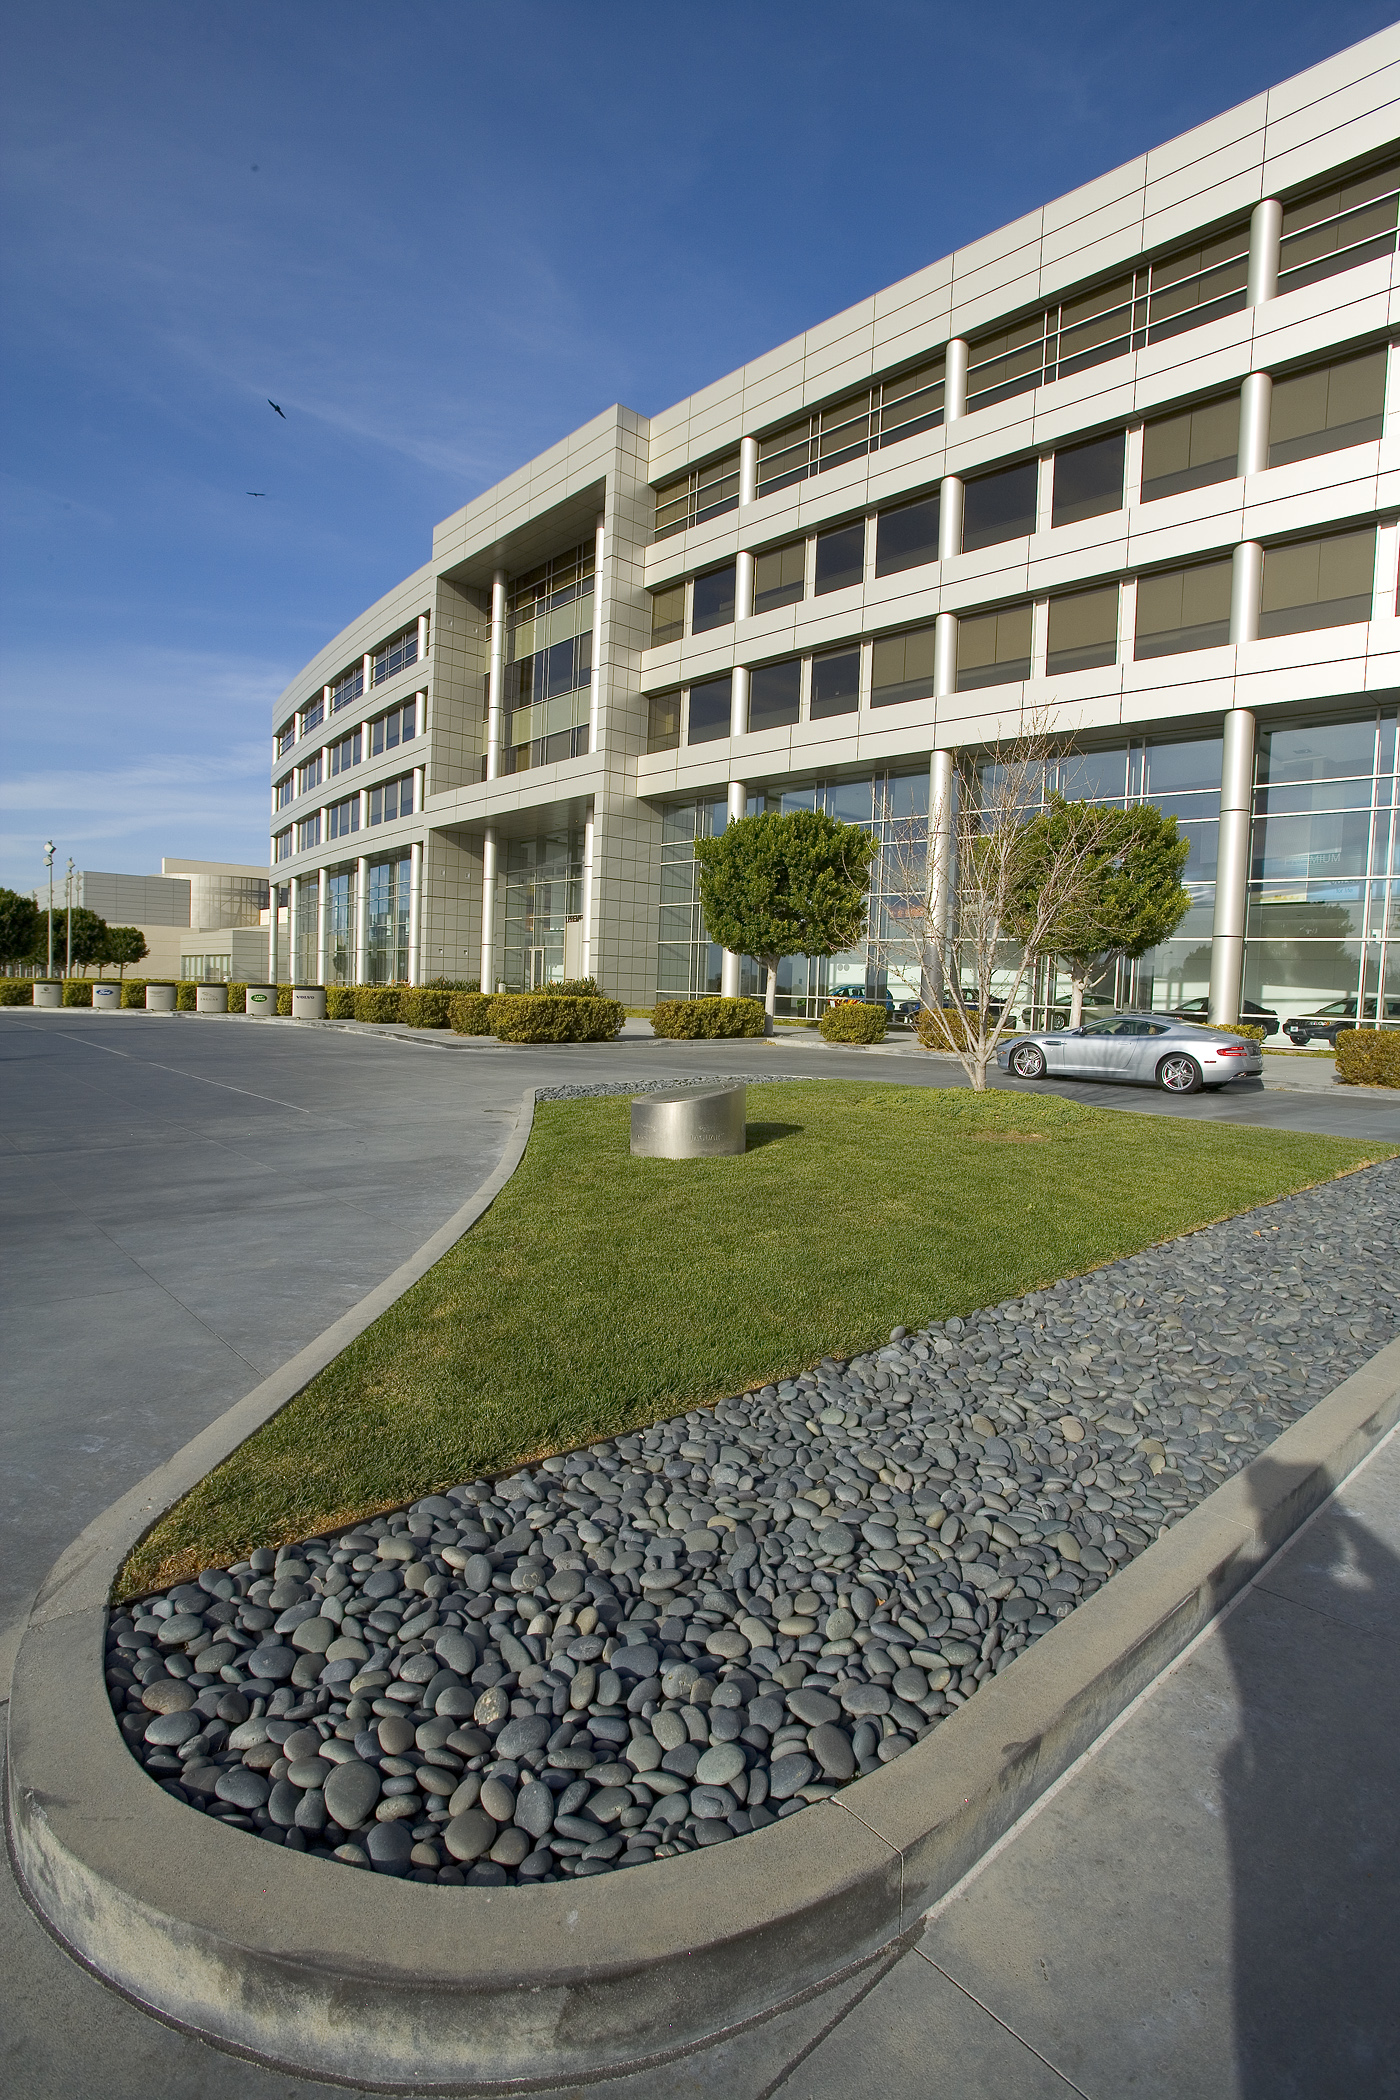 PACIFIC AUTOMOTIVE GROUP GREEN ROOF